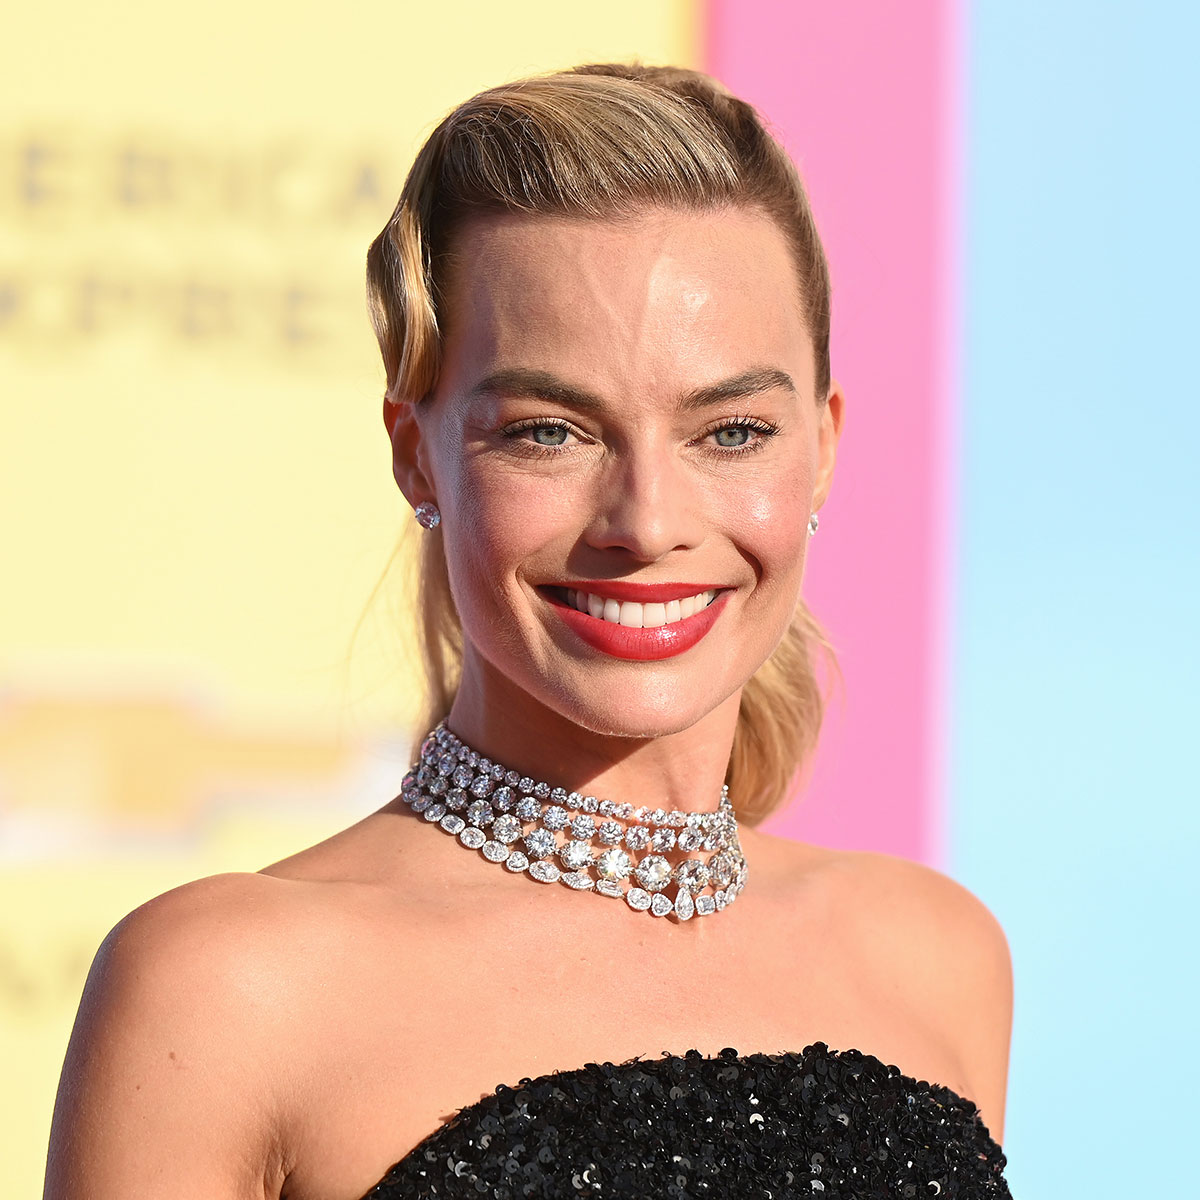 Fans Can't Believe Margot Robbie Didn't Wear Pink To The 'Barbie' Premiere:  'Shocking That She's Wearing Black' - SHEfinds